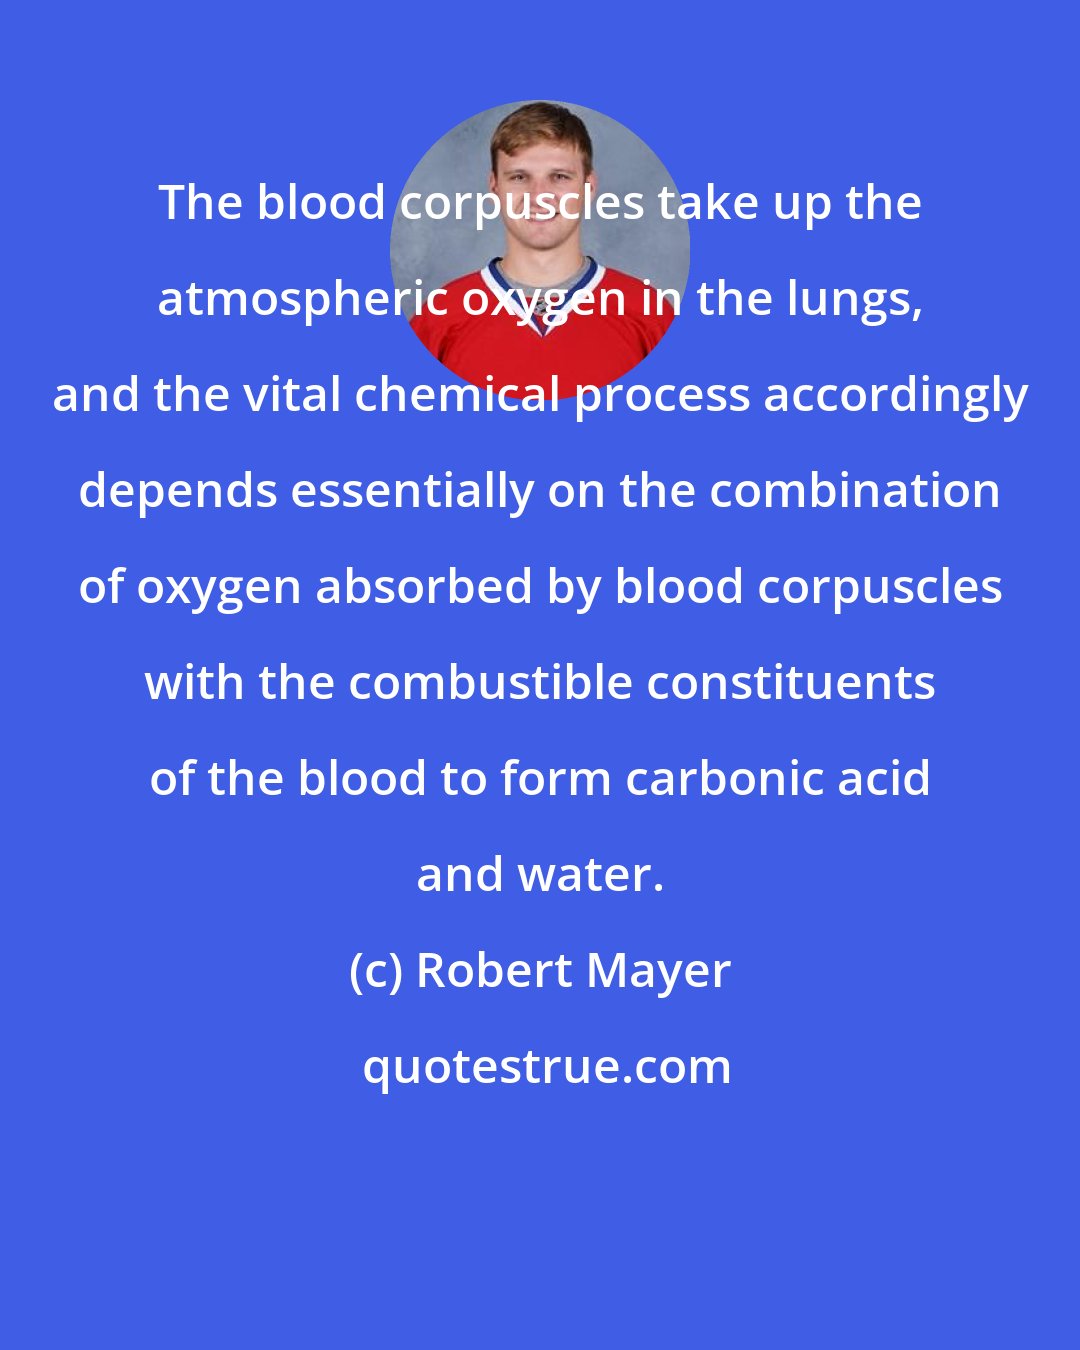 Robert Mayer: The blood corpuscles take up the atmospheric oxygen in the lungs, and the vital chemical process accordingly depends essentially on the combination of oxygen absorbed by blood corpuscles with the combustible constituents of the blood to form carbonic acid and water.